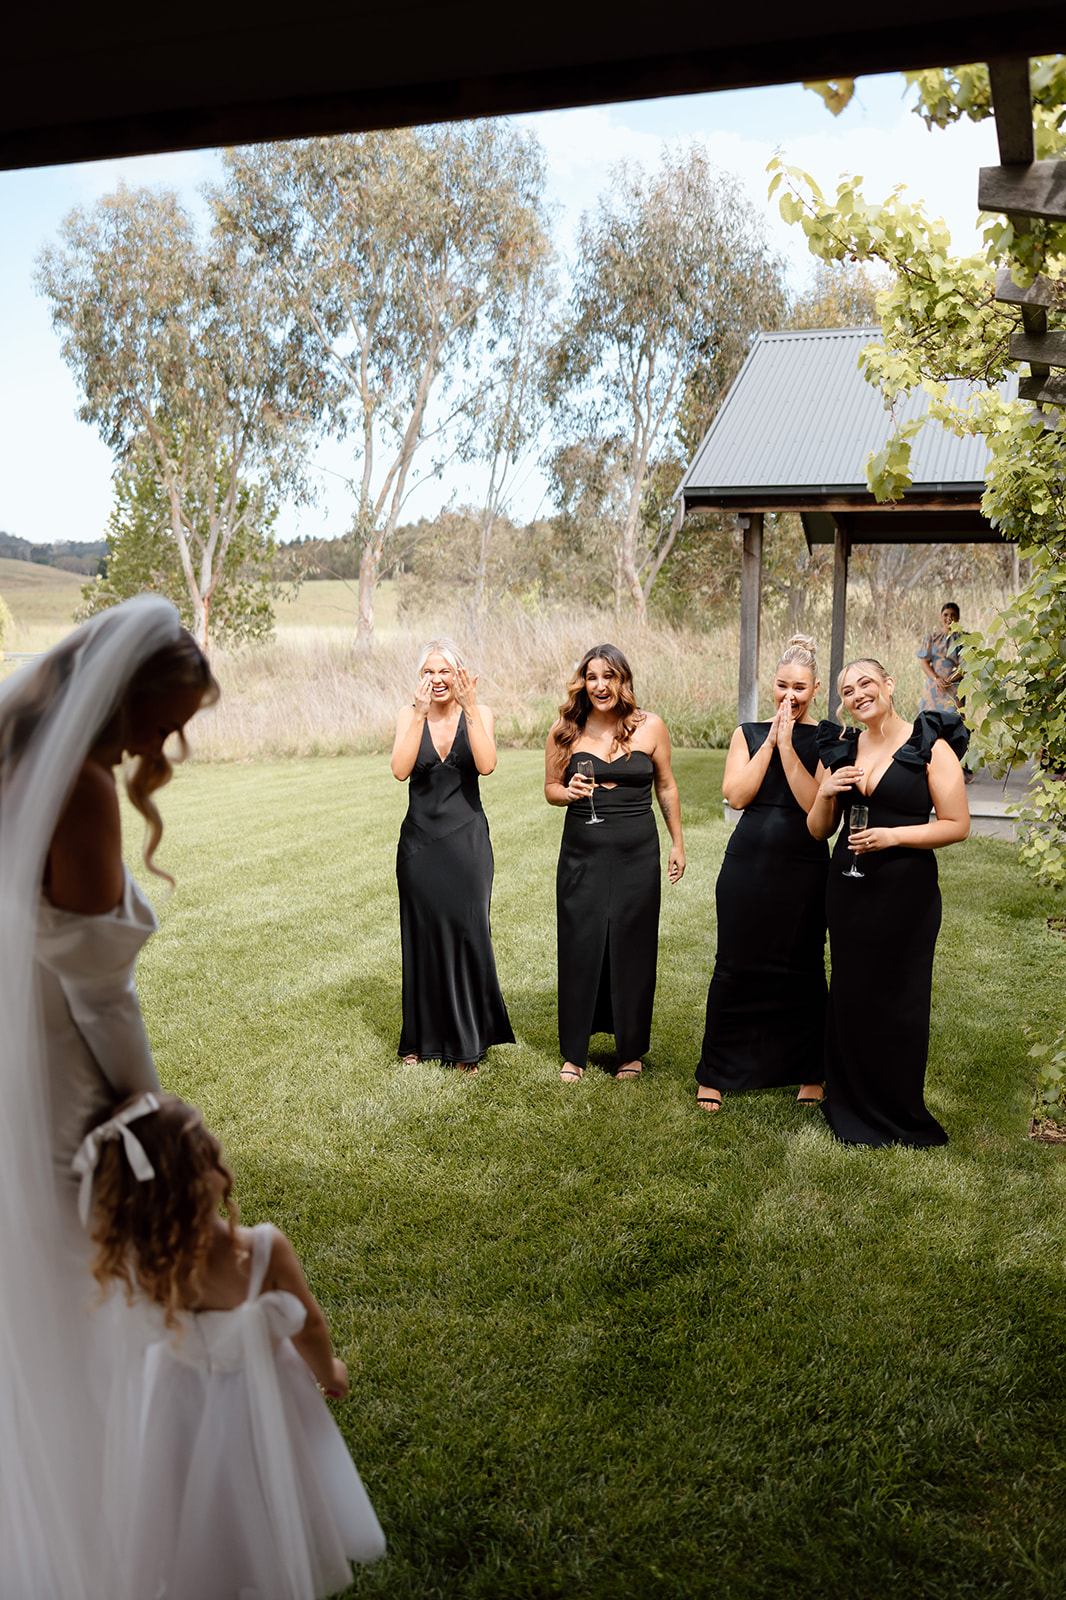 Bride first look with her bridesmaids at the wedding in the Southern Highlands Bendooley Estate